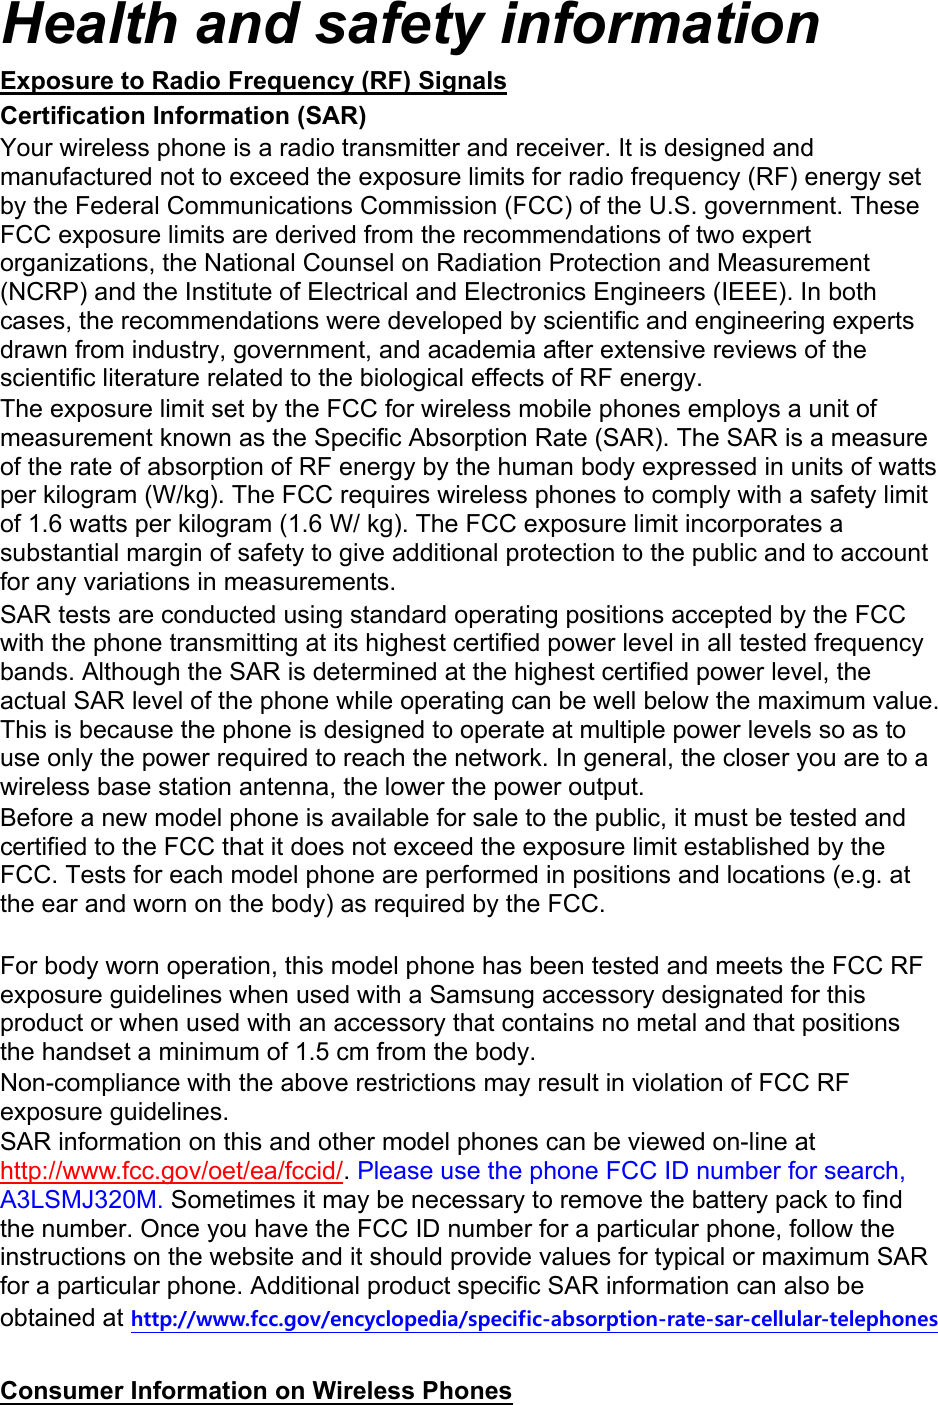 Health and safety information Exposure to Radio Frequency (RF) Signals Certification Information (SAR) Your wireless phone is a radio transmitter and receiver. It is designed and manufactured not to exceed the exposure limits for radio frequency (RF) energy set by the Federal Communications Commission (FCC) of the U.S. government. These FCC exposure limits are derived from the recommendations of two expert organizations, the National Counsel on Radiation Protection and Measurement (NCRP) and the Institute of Electrical and Electronics Engineers (IEEE). In both cases, the recommendations were developed by scientific and engineering experts drawn from industry, government, and academia after extensive reviews of the scientific literature related to the biological effects of RF energy. The exposure limit set by the FCC for wireless mobile phones employs a unit of measurement known as the Specific Absorption Rate (SAR). The SAR is a measure of the rate of absorption of RF energy by the human body expressed in units of watts per kilogram (W/kg). The FCC requires wireless phones to comply with a safety limit of 1.6 watts per kilogram (1.6 W/ kg). The FCC exposure limit incorporates a substantial margin of safety to give additional protection to the public and to account for any variations in measurements. SAR tests are conducted using standard operating positions accepted by the FCC with the phone transmitting at its highest certified power level in all tested frequency bands. Although the SAR is determined at the highest certified power level, the actual SAR level of the phone while operating can be well below the maximum value. This is because the phone is designed to operate at multiple power levels so as to use only the power required to reach the network. In general, the closer you are to a wireless base station antenna, the lower the power output. Before a new model phone is available for sale to the public, it must be tested and certified to the FCC that it does not exceed the exposure limit established by the FCC. Tests for each model phone are performed in positions and locations (e.g. at the ear and worn on the body) as required by the FCC.      For body worn operation, this model phone has been tested and meets the FCC RF exposure guidelines when used with a Samsung accessory designated for this product or when used with an accessory that contains no metal and that positions the handset a minimum of 1.5 cm from the body.   Non-compliance with the above restrictions may result in violation of FCC RF exposure guidelines. SAR information on this and other model phones can be viewed on-line at http://www.fcc.gov/oet/ea/fccid/. Please use the phone FCC ID number for search, A3LSMJ320M. Sometimes it may be necessary to remove the battery pack to find the number. Once you have the FCC ID number for a particular phone, follow the instructions on the website and it should provide values for typical or maximum SAR for a particular phone. Additional product specific SAR information can also be obtained at http://www.fcc.gov/encyclopedia/specific-absorption-rate-sar-cellular-telephones  Consumer Information on Wireless Phones 